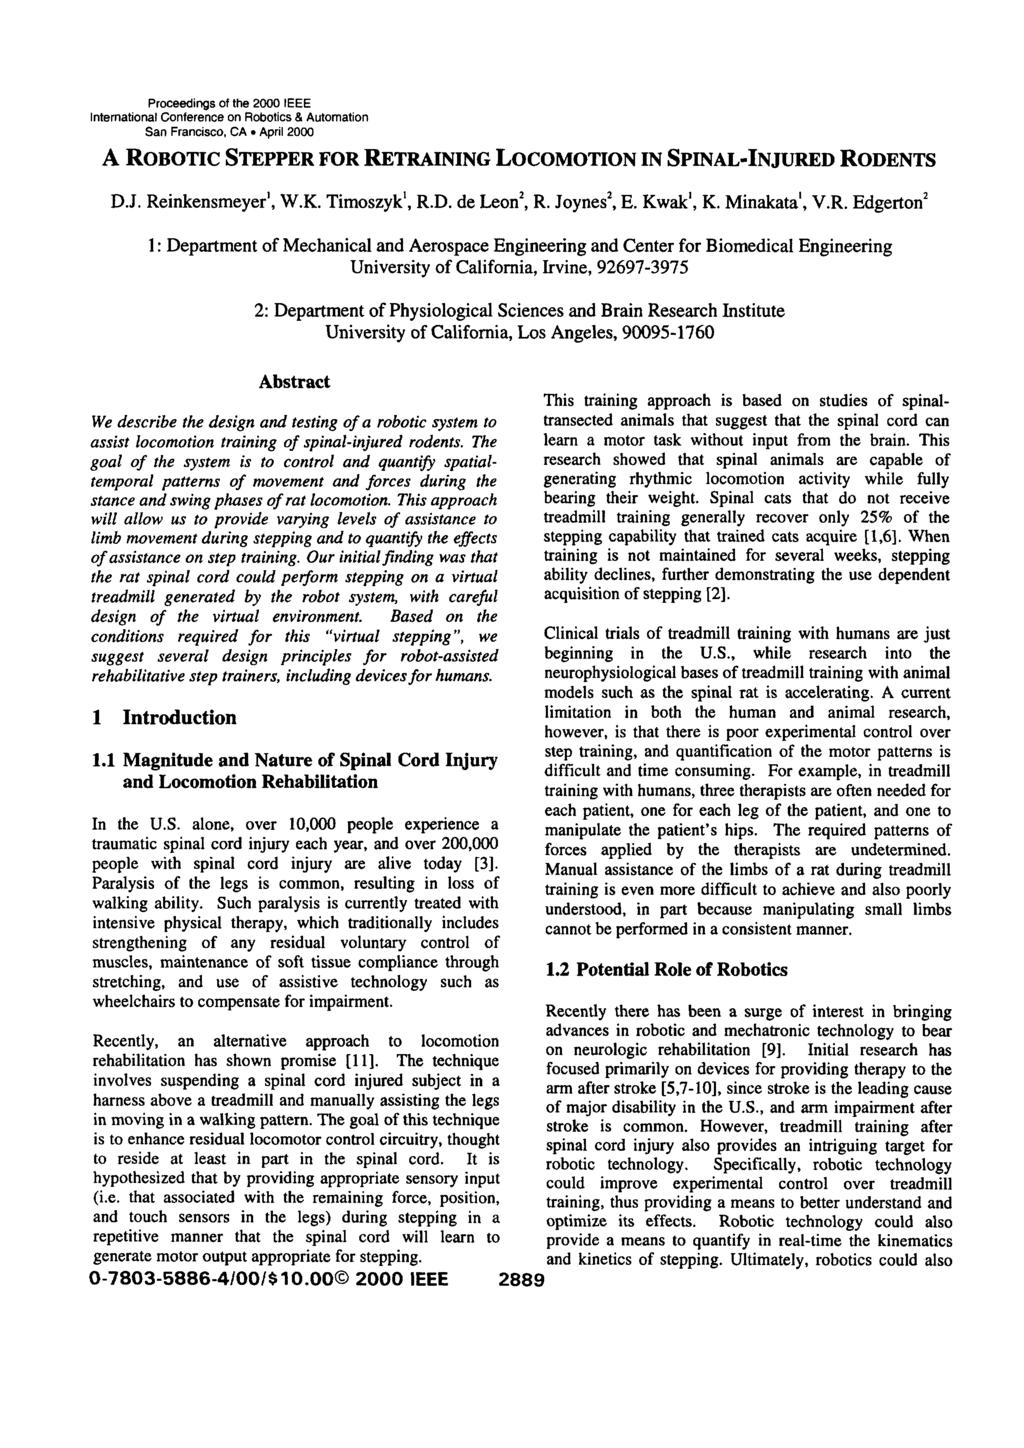 Proceedings of the 2000 IEEE International Conference on Robotics & Automation San Francisco, CA April 2000 A ROBOTIC STEPPER FOR RETRAINING LOCOMOTION IN SPINAL-INJURED RODENTS D.J. Reinkensmeyer', W.